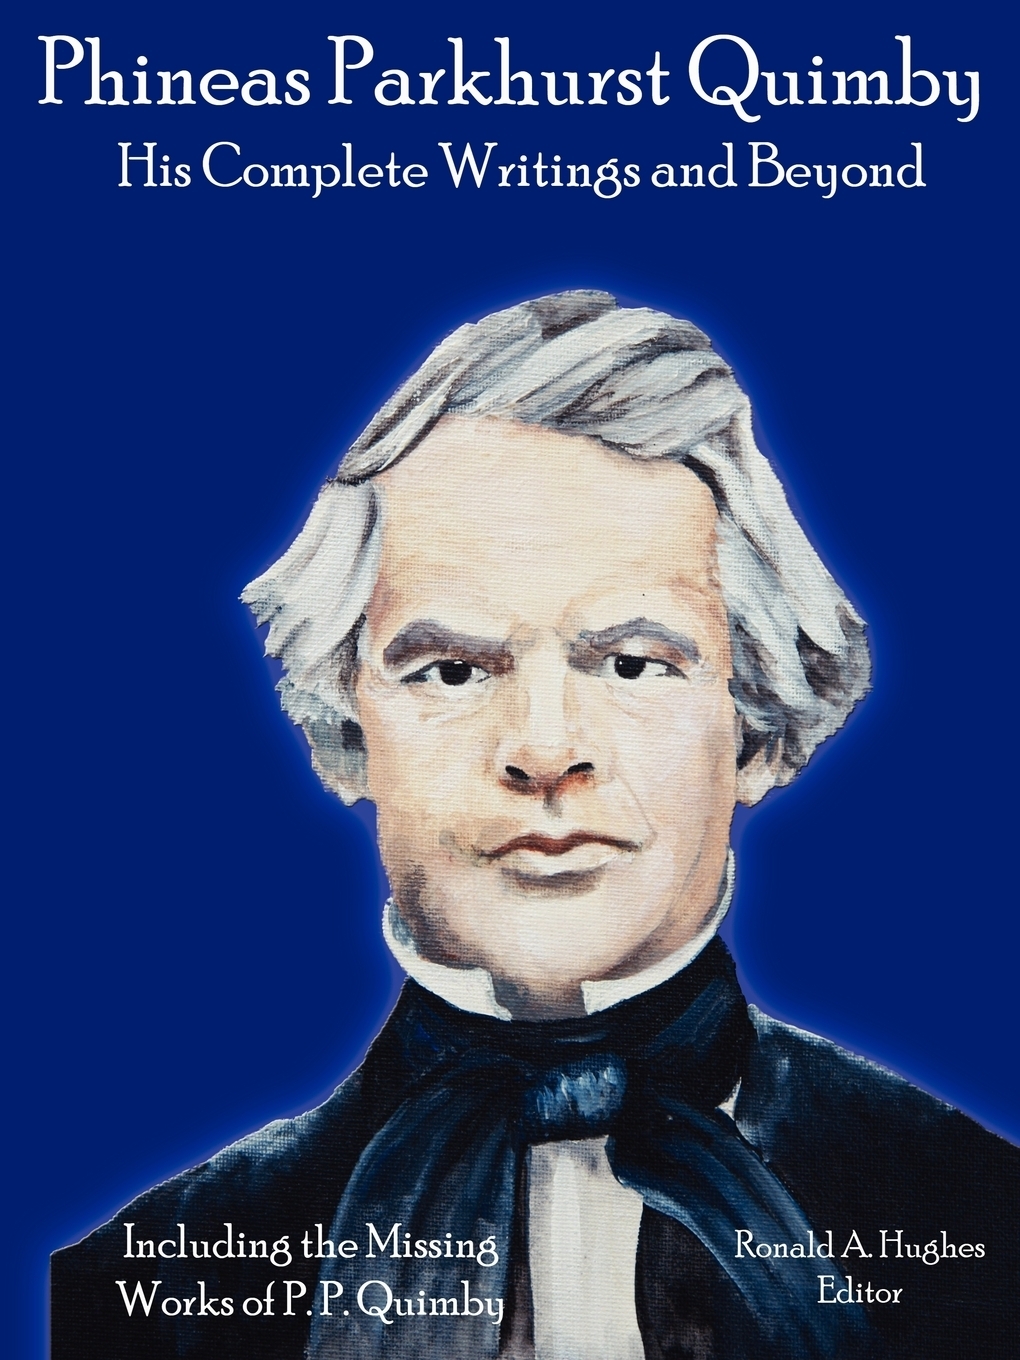 Phineas Parkhurst Quimby. His Complete Writings and Beyond